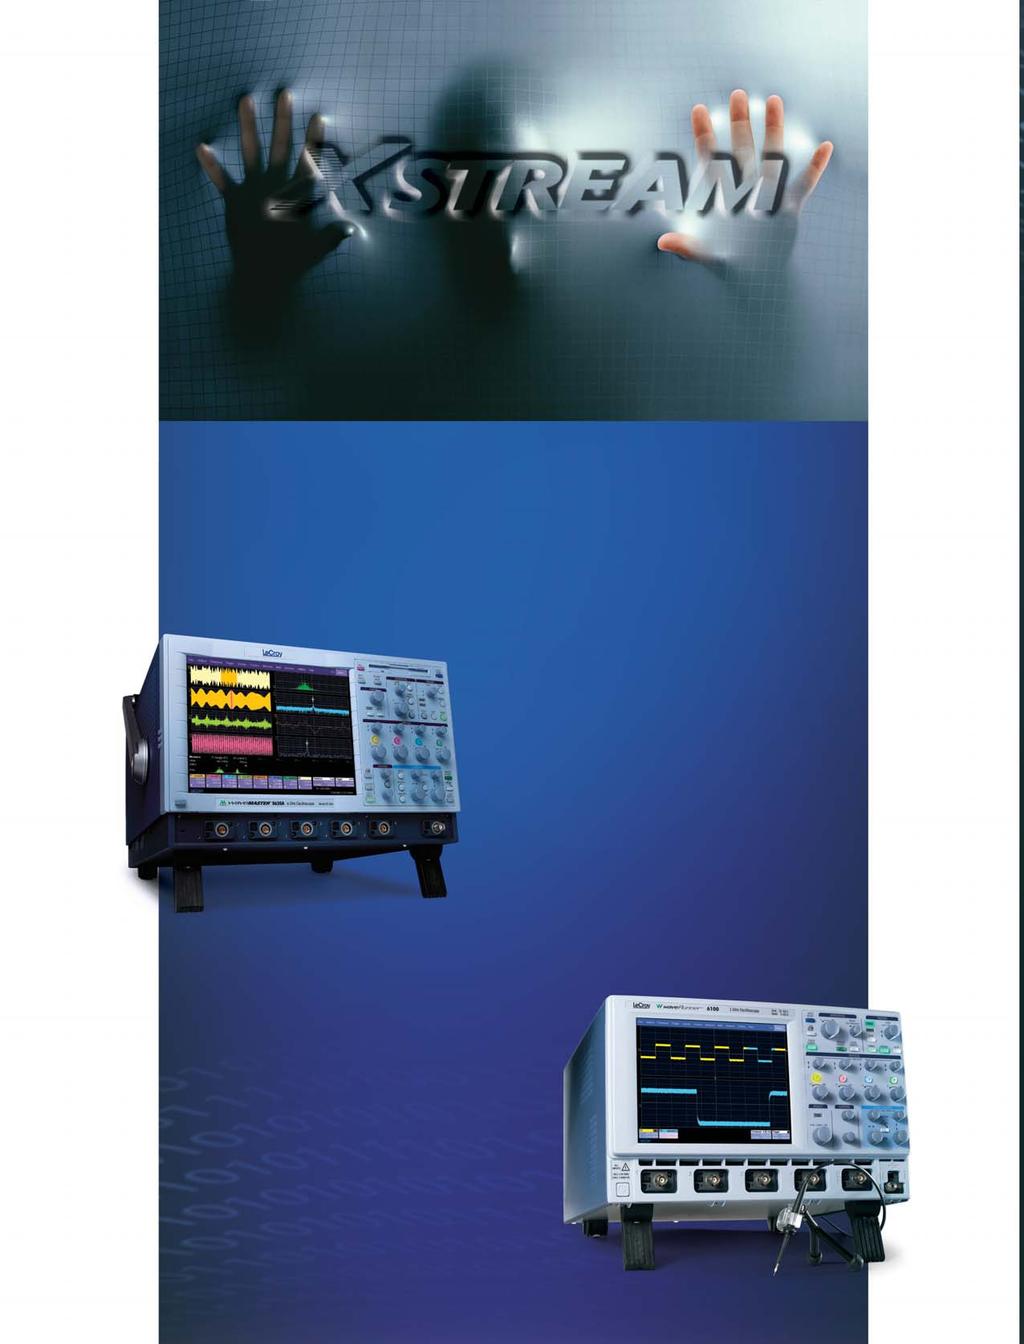 Breakthrough WaveShape Analysis from LeCroy s Family of X-Stream-based Instruments The WavePro 7000 Series of digital oscilloscopes is part of a growing family of instruments that has LeCroy s